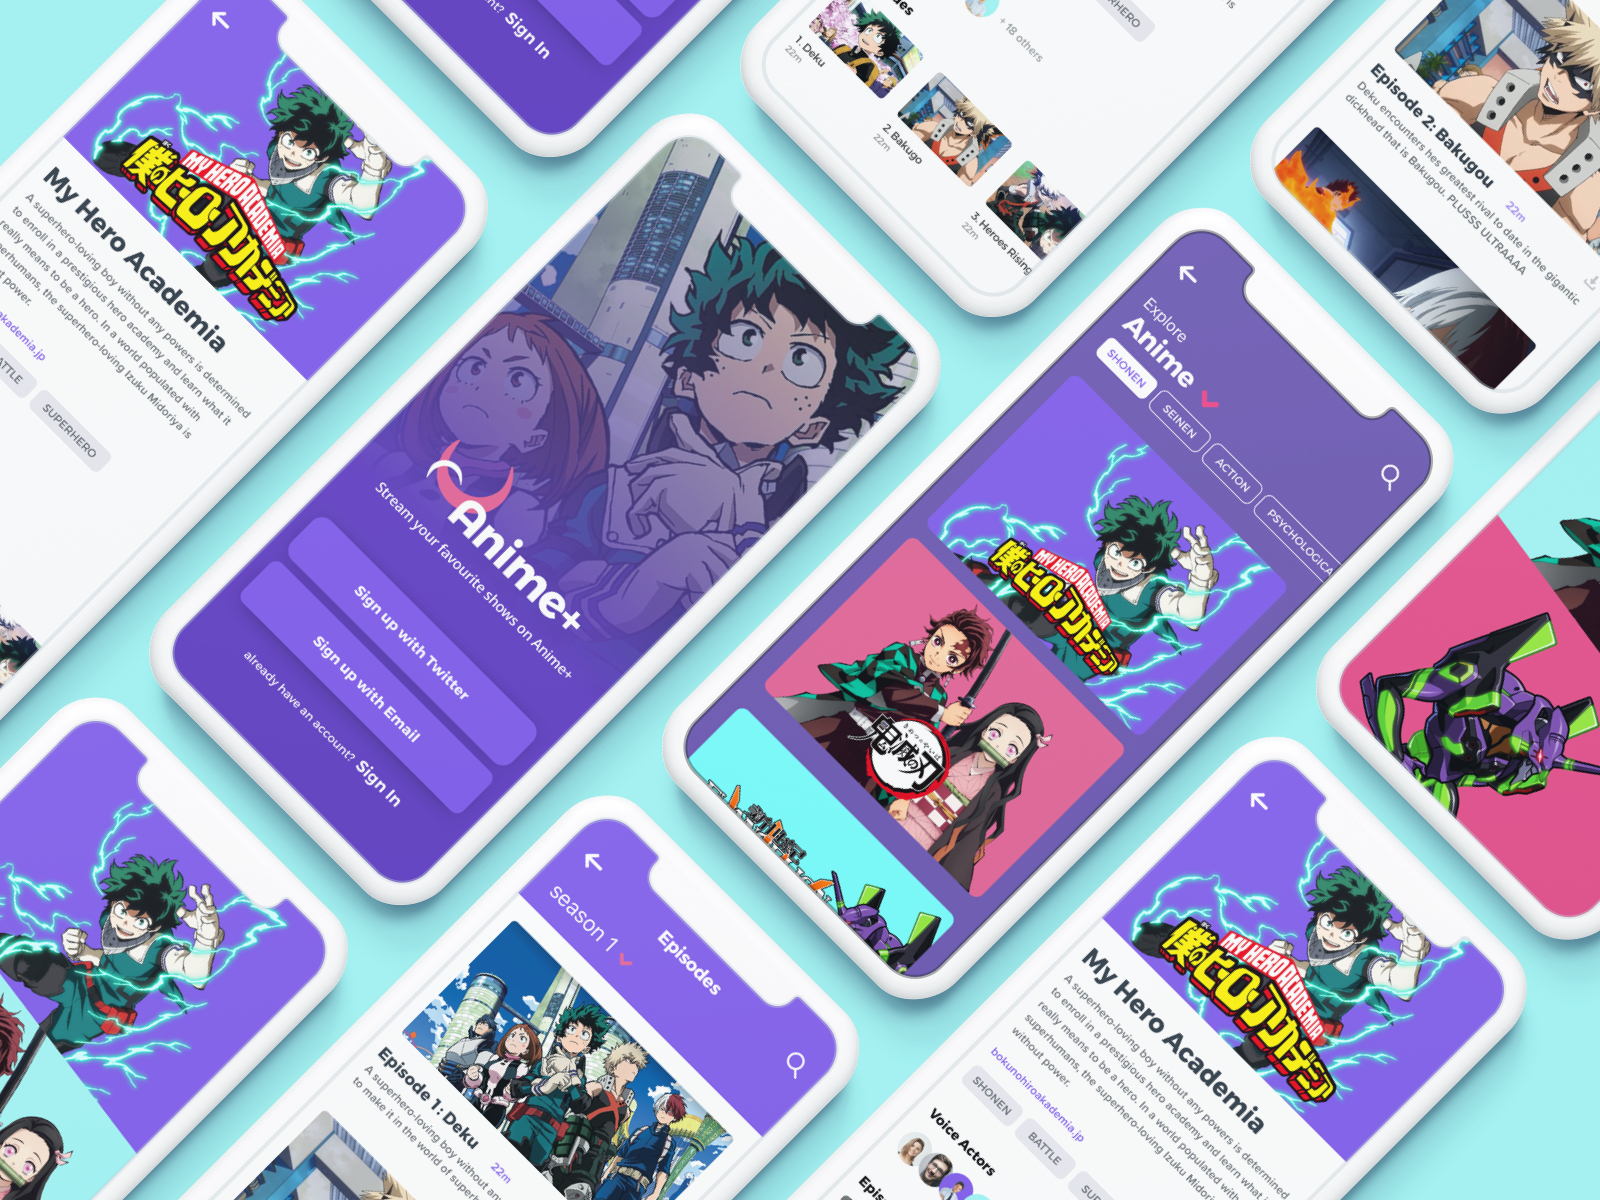 Anime Streaming App by Will Morrissey on Dribbble